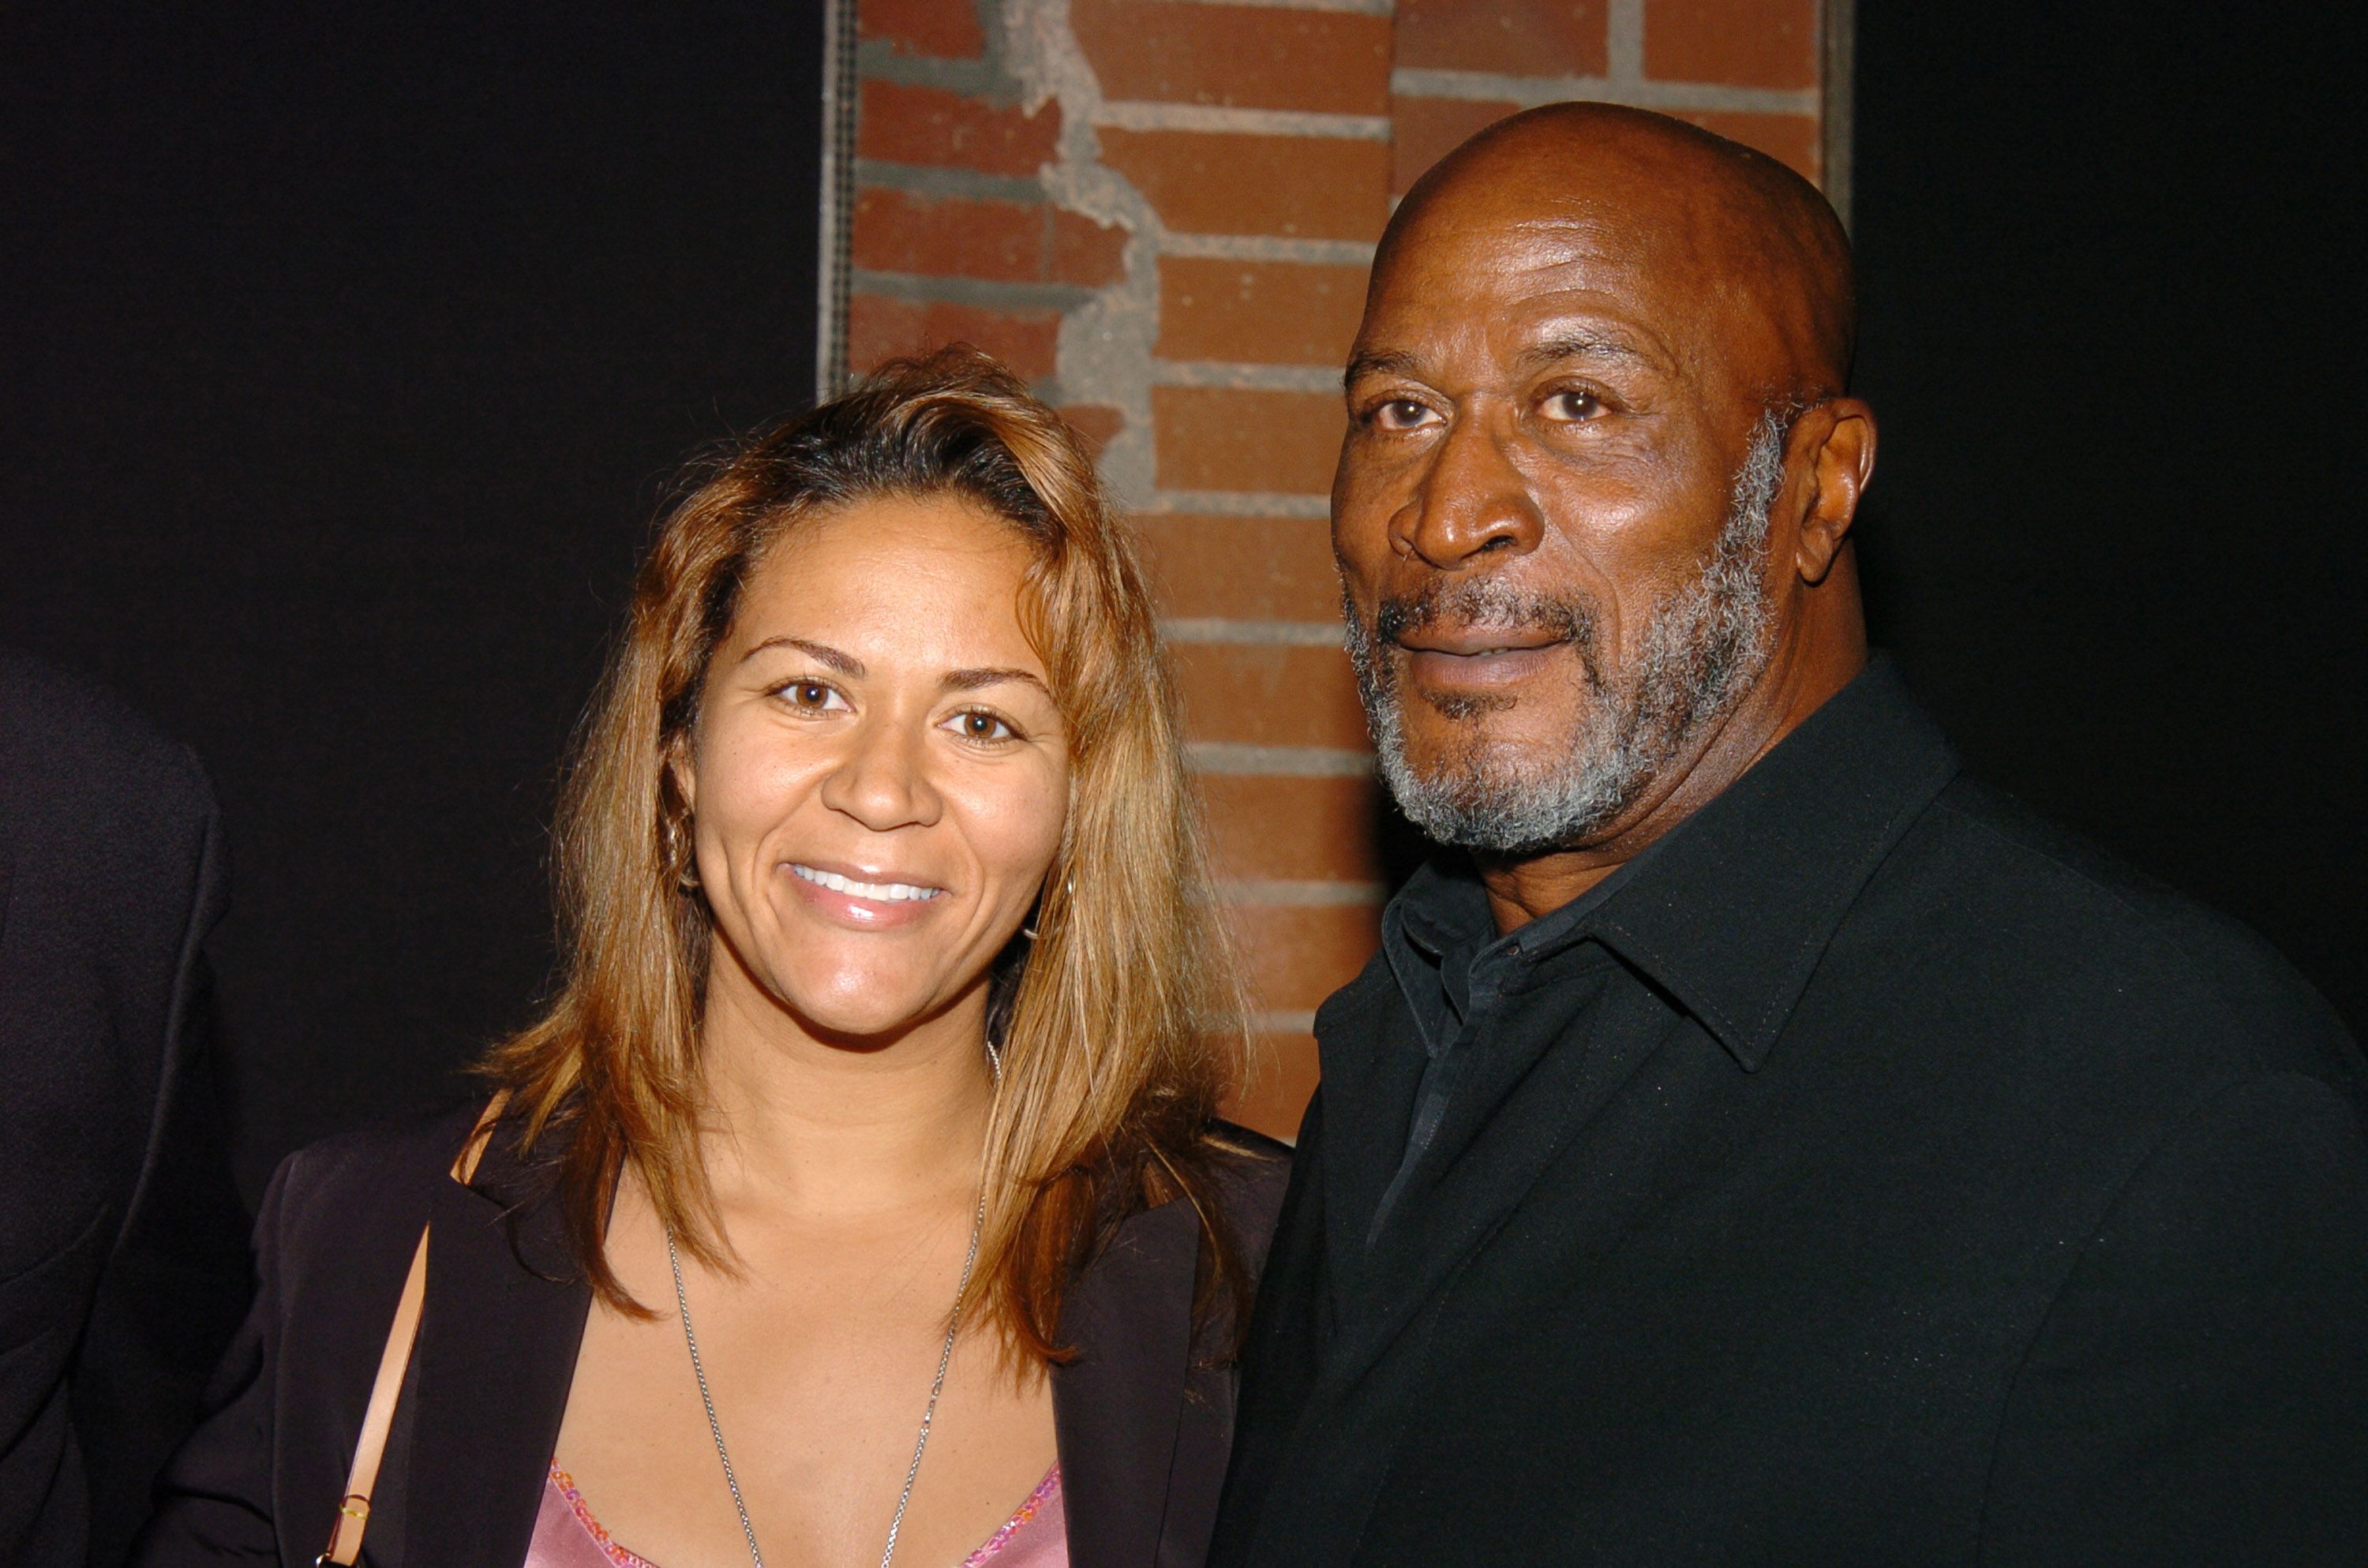 John Amos and daughter Shannon at the after-party of Cure Autism Now's celebration of the 3rd annual "Acts of Love" at Lucques Restaurant on November 8, 2004 | Photo: Getty Image